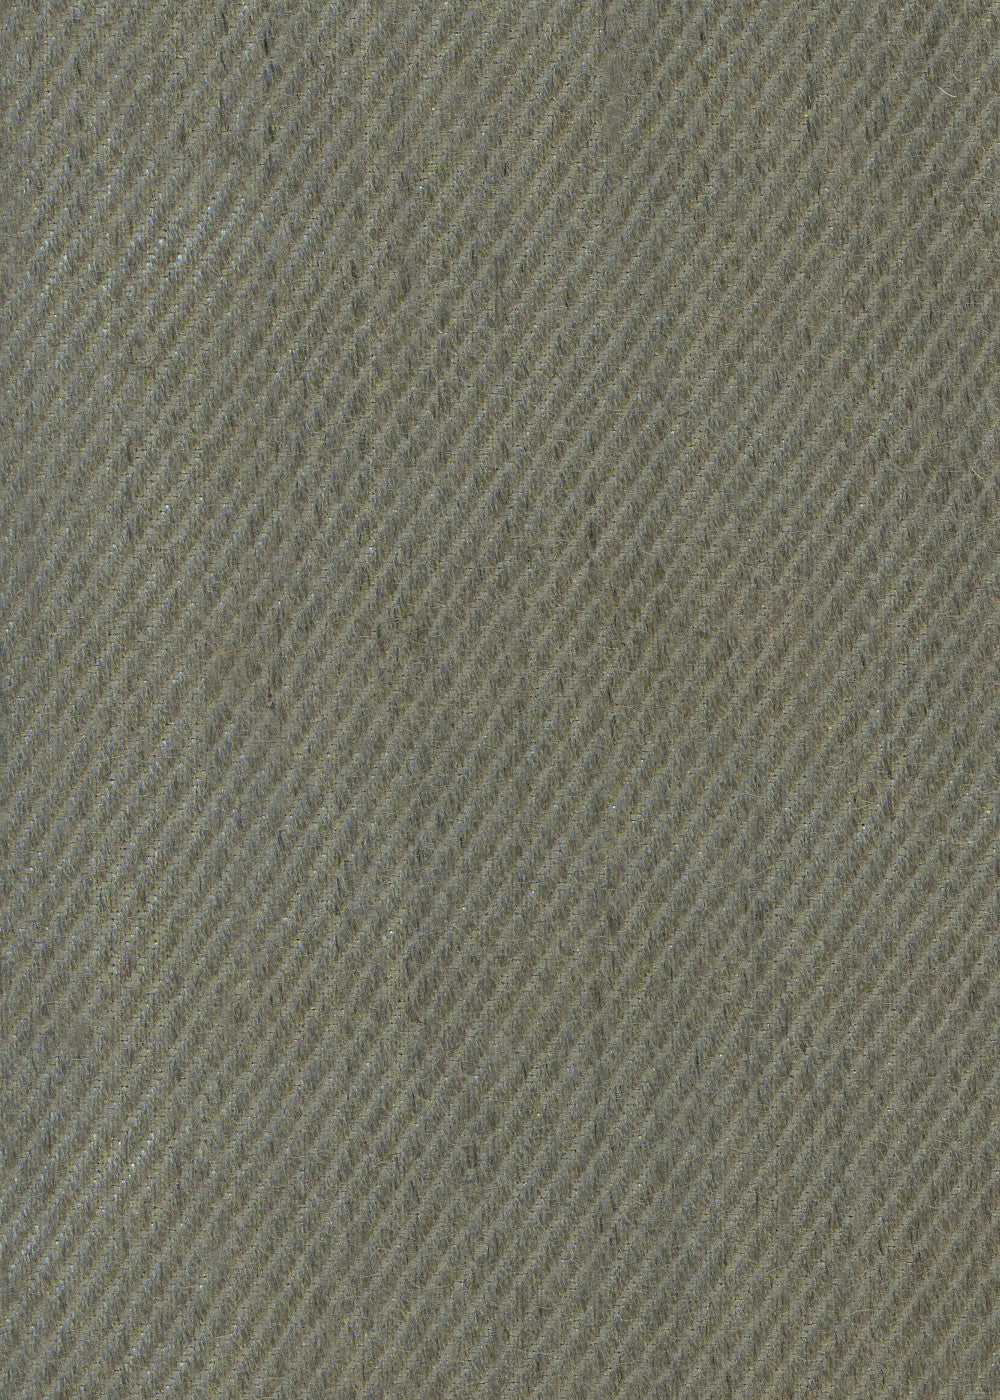 close up of a twill upholstery fabric in dark green-grey